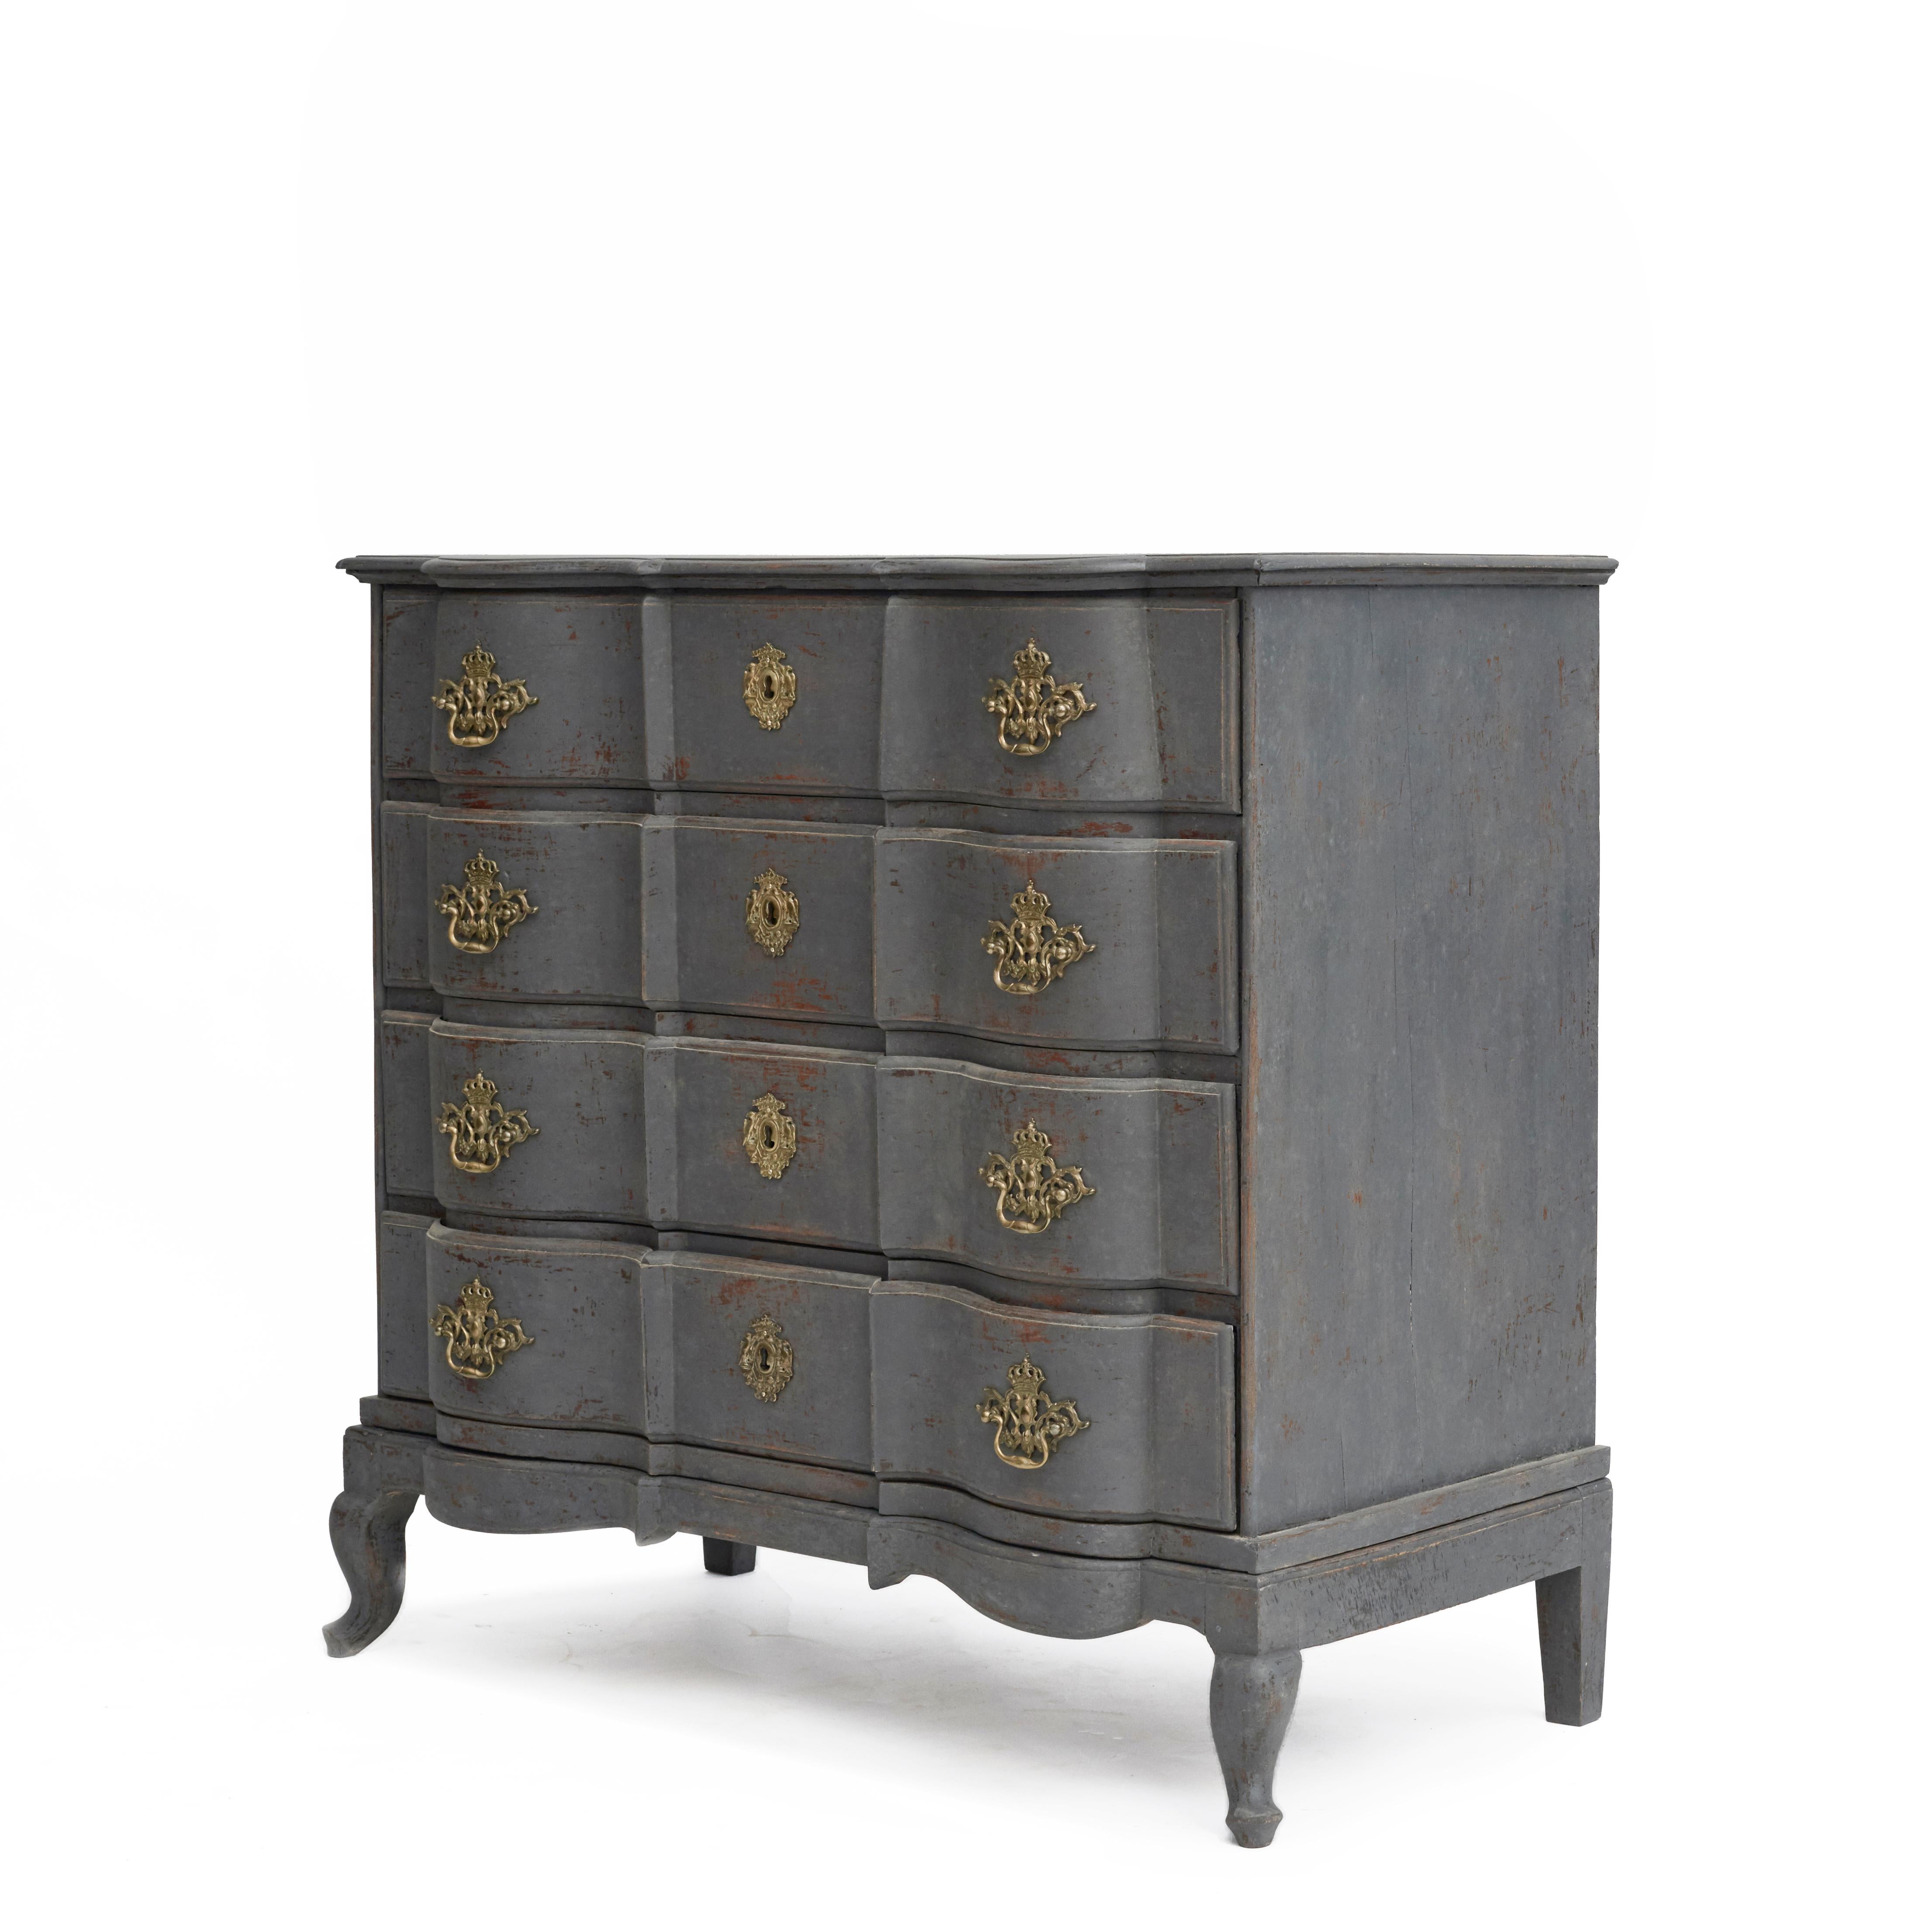 Danish 18th century baroque chest of drawers painted in bluish-gray.
Front with beautifully carved serpentine drawers adorned with original bronze fittings in the form of crowns on drawer handles and falcon locks.
Denmark 1730-1750.

Later